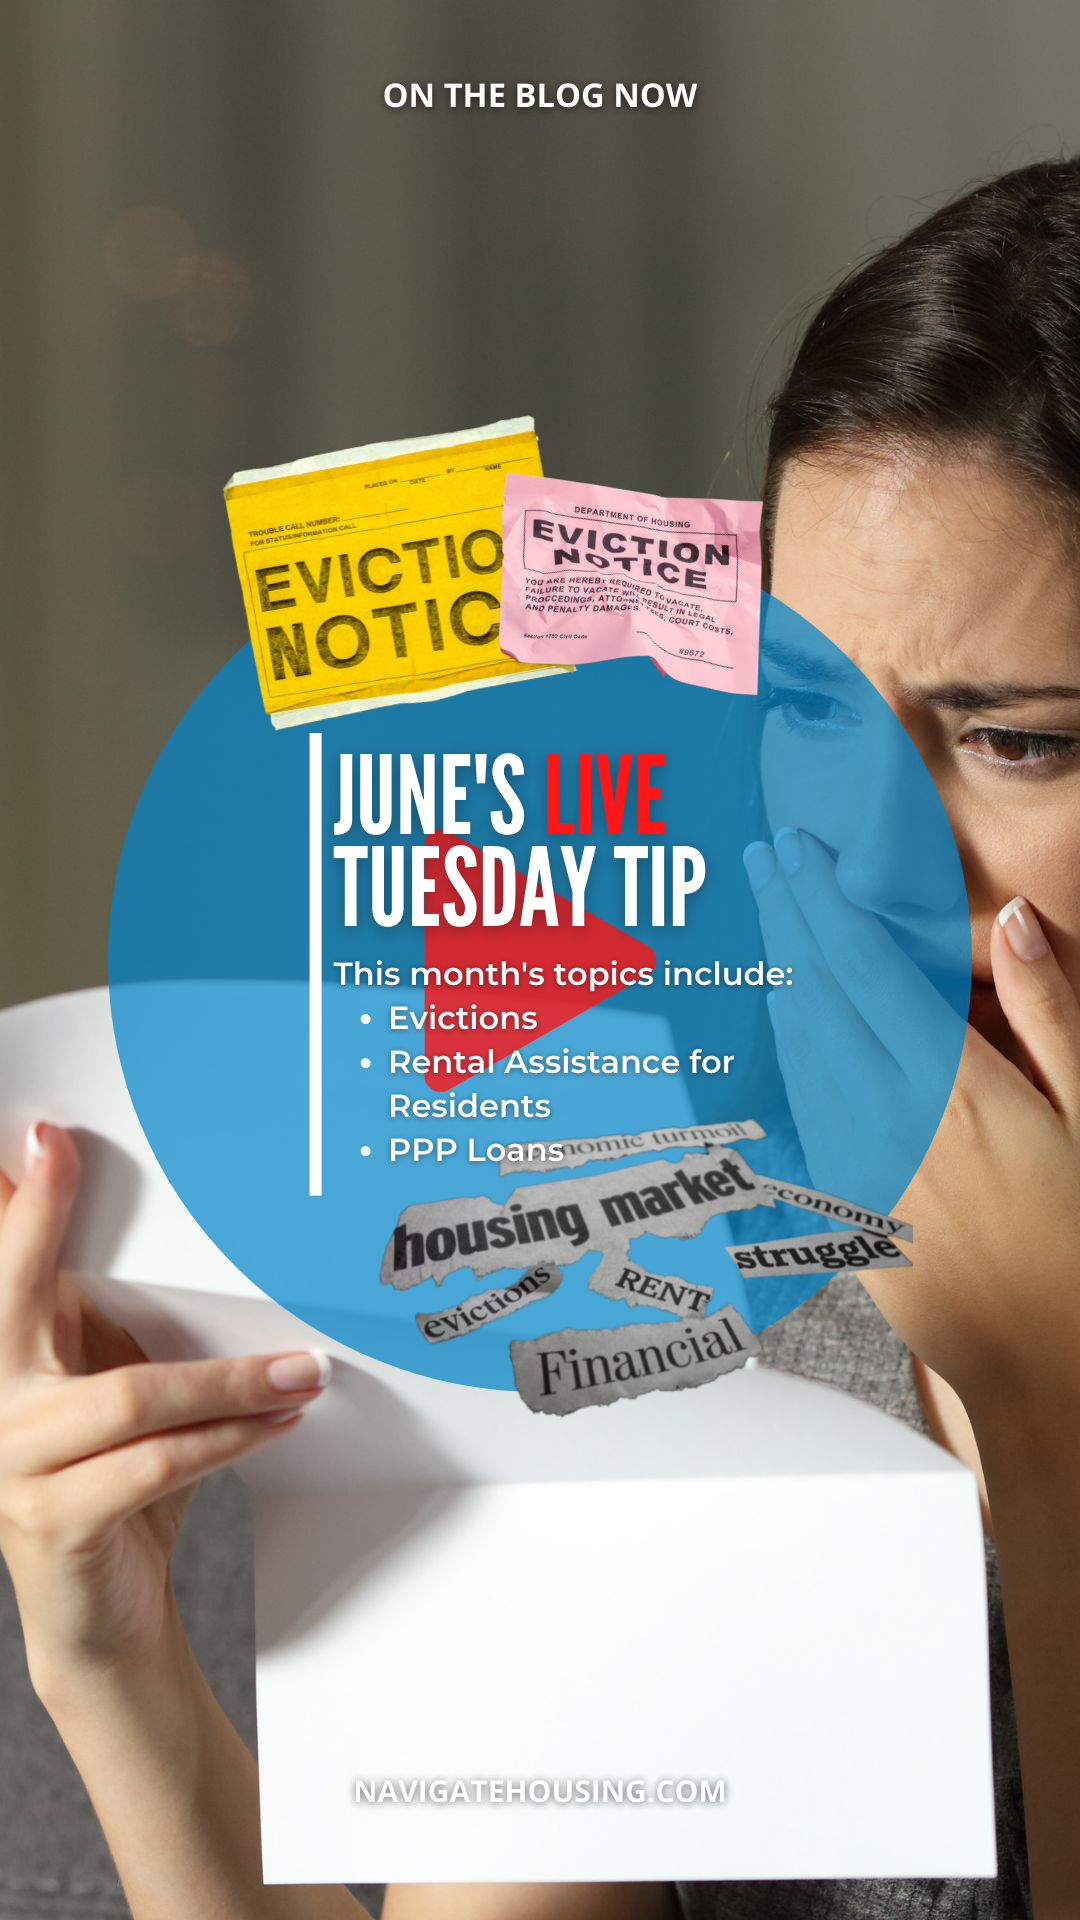 June Live Tuesday Tip: Evictions and Rental Assistance